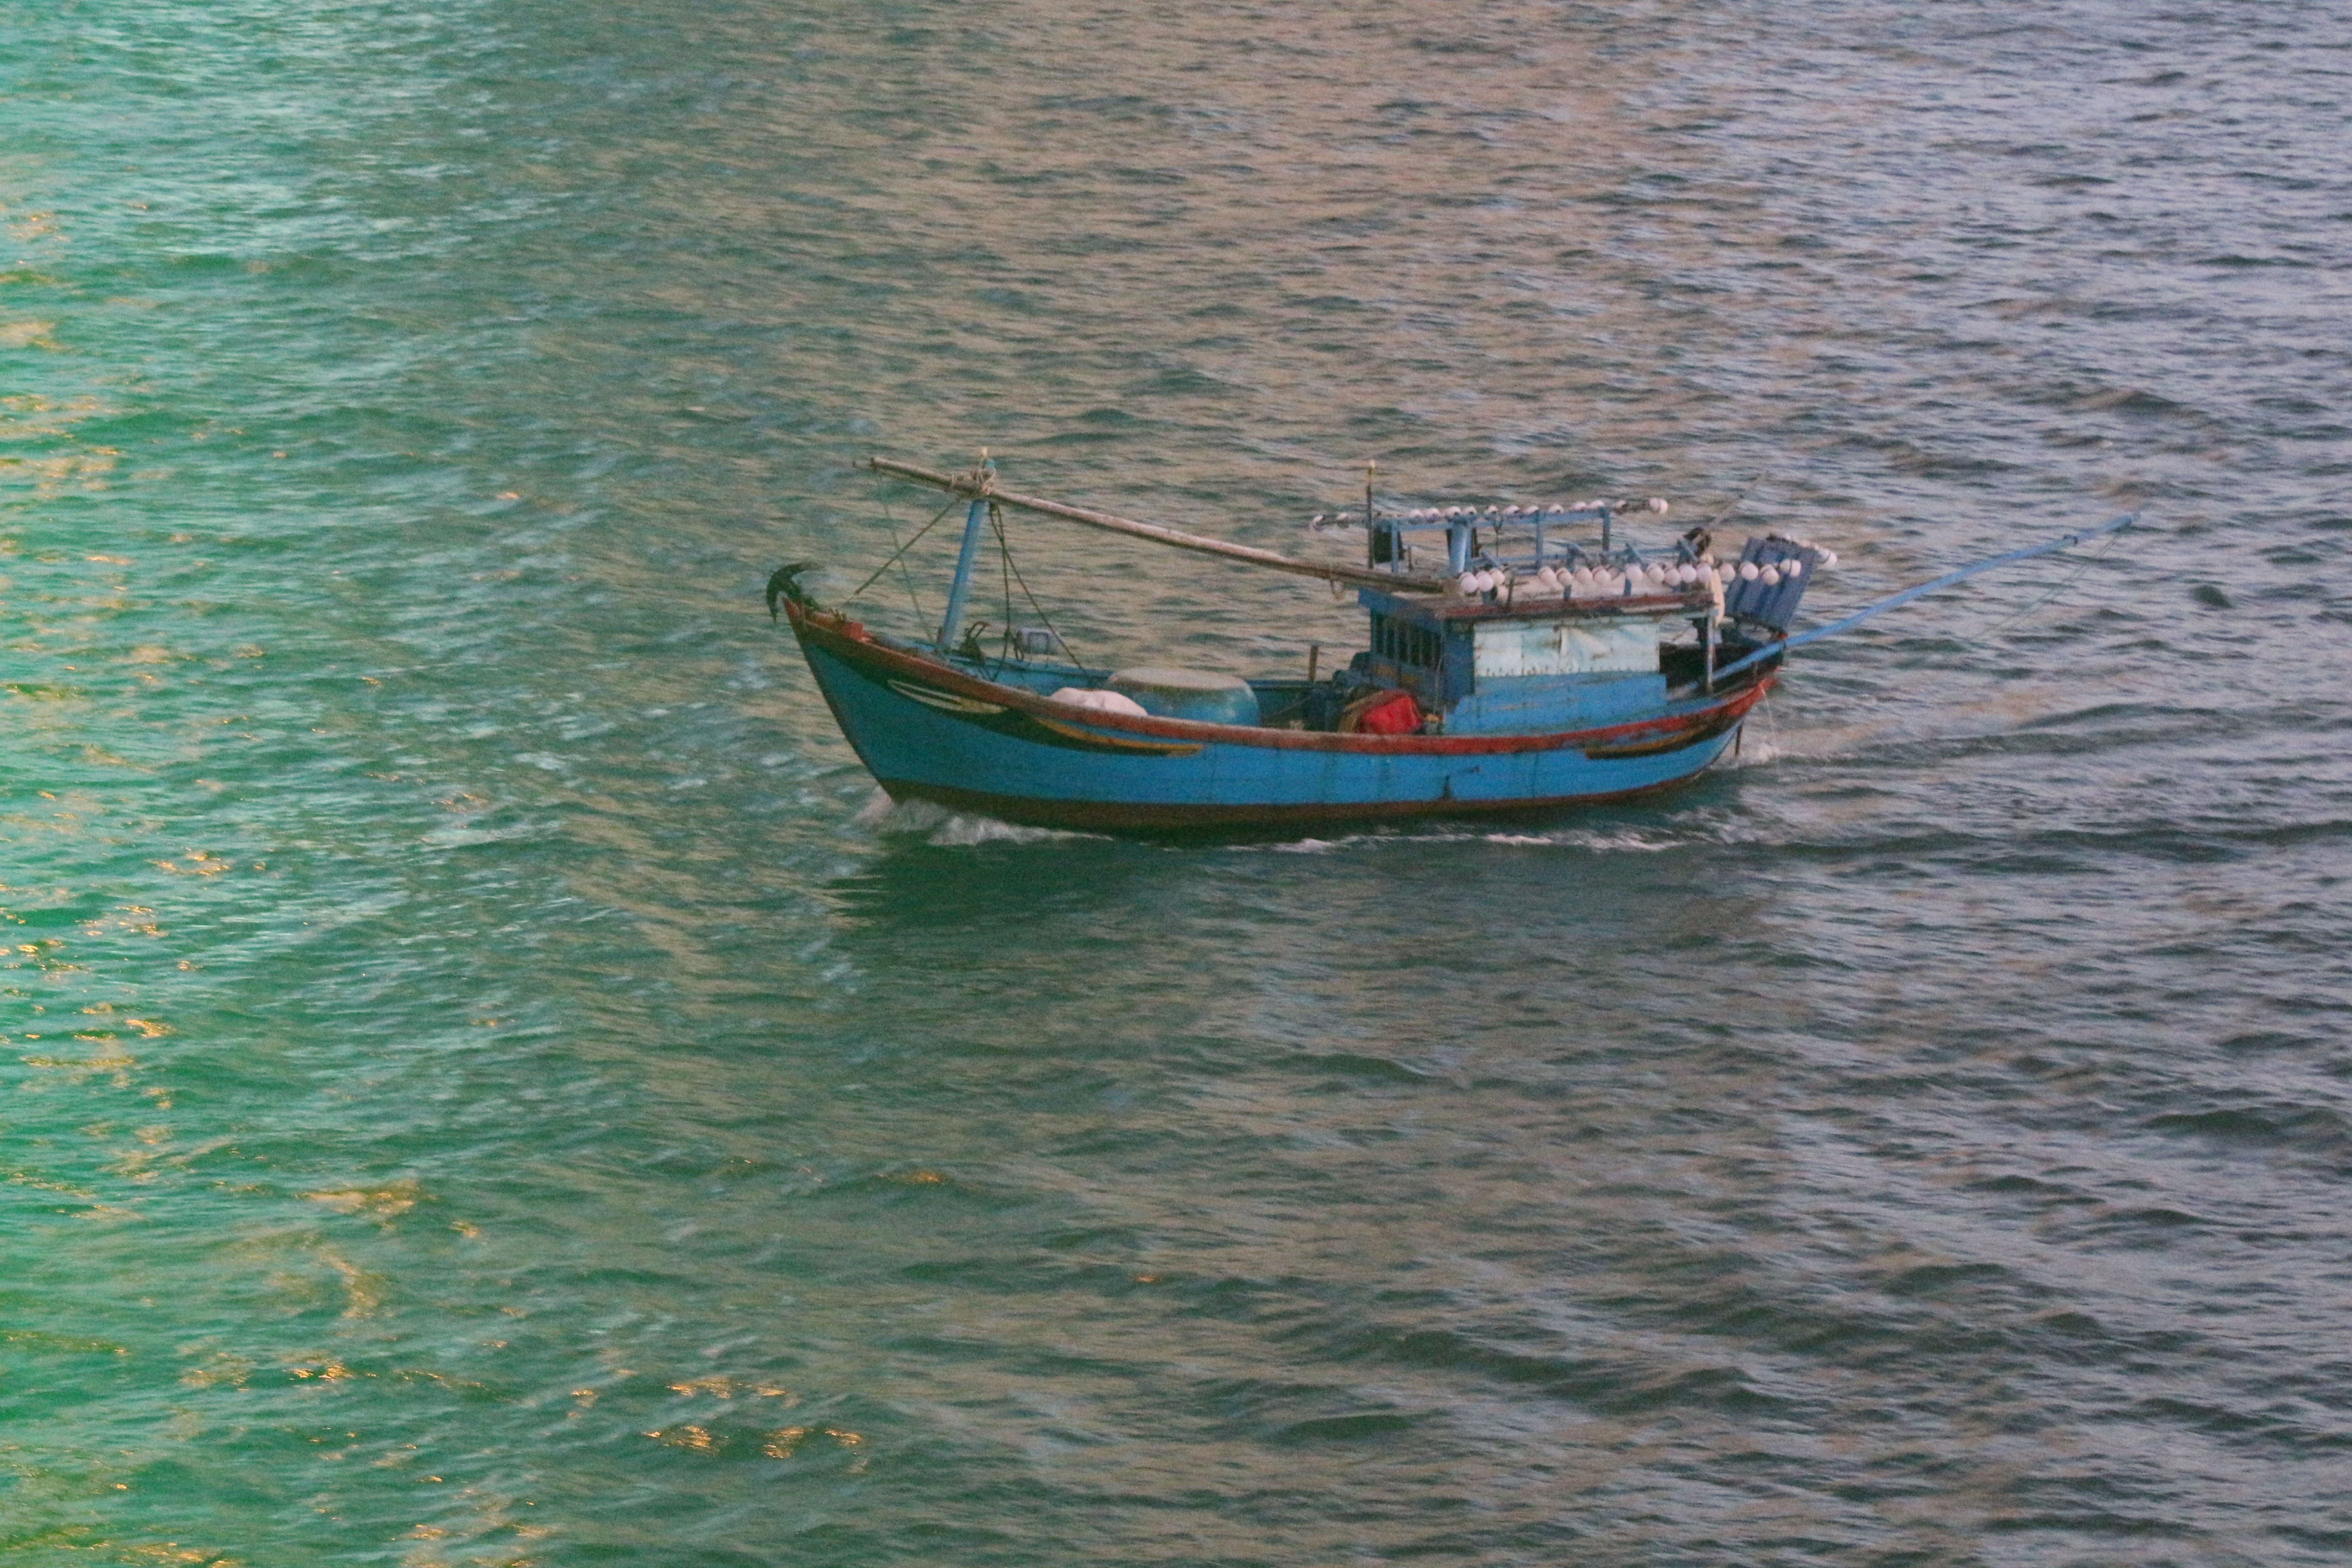 A fishing boat is on the water in Nha Trang City. Photo: Ray Kuschert / Tuoi Tre News